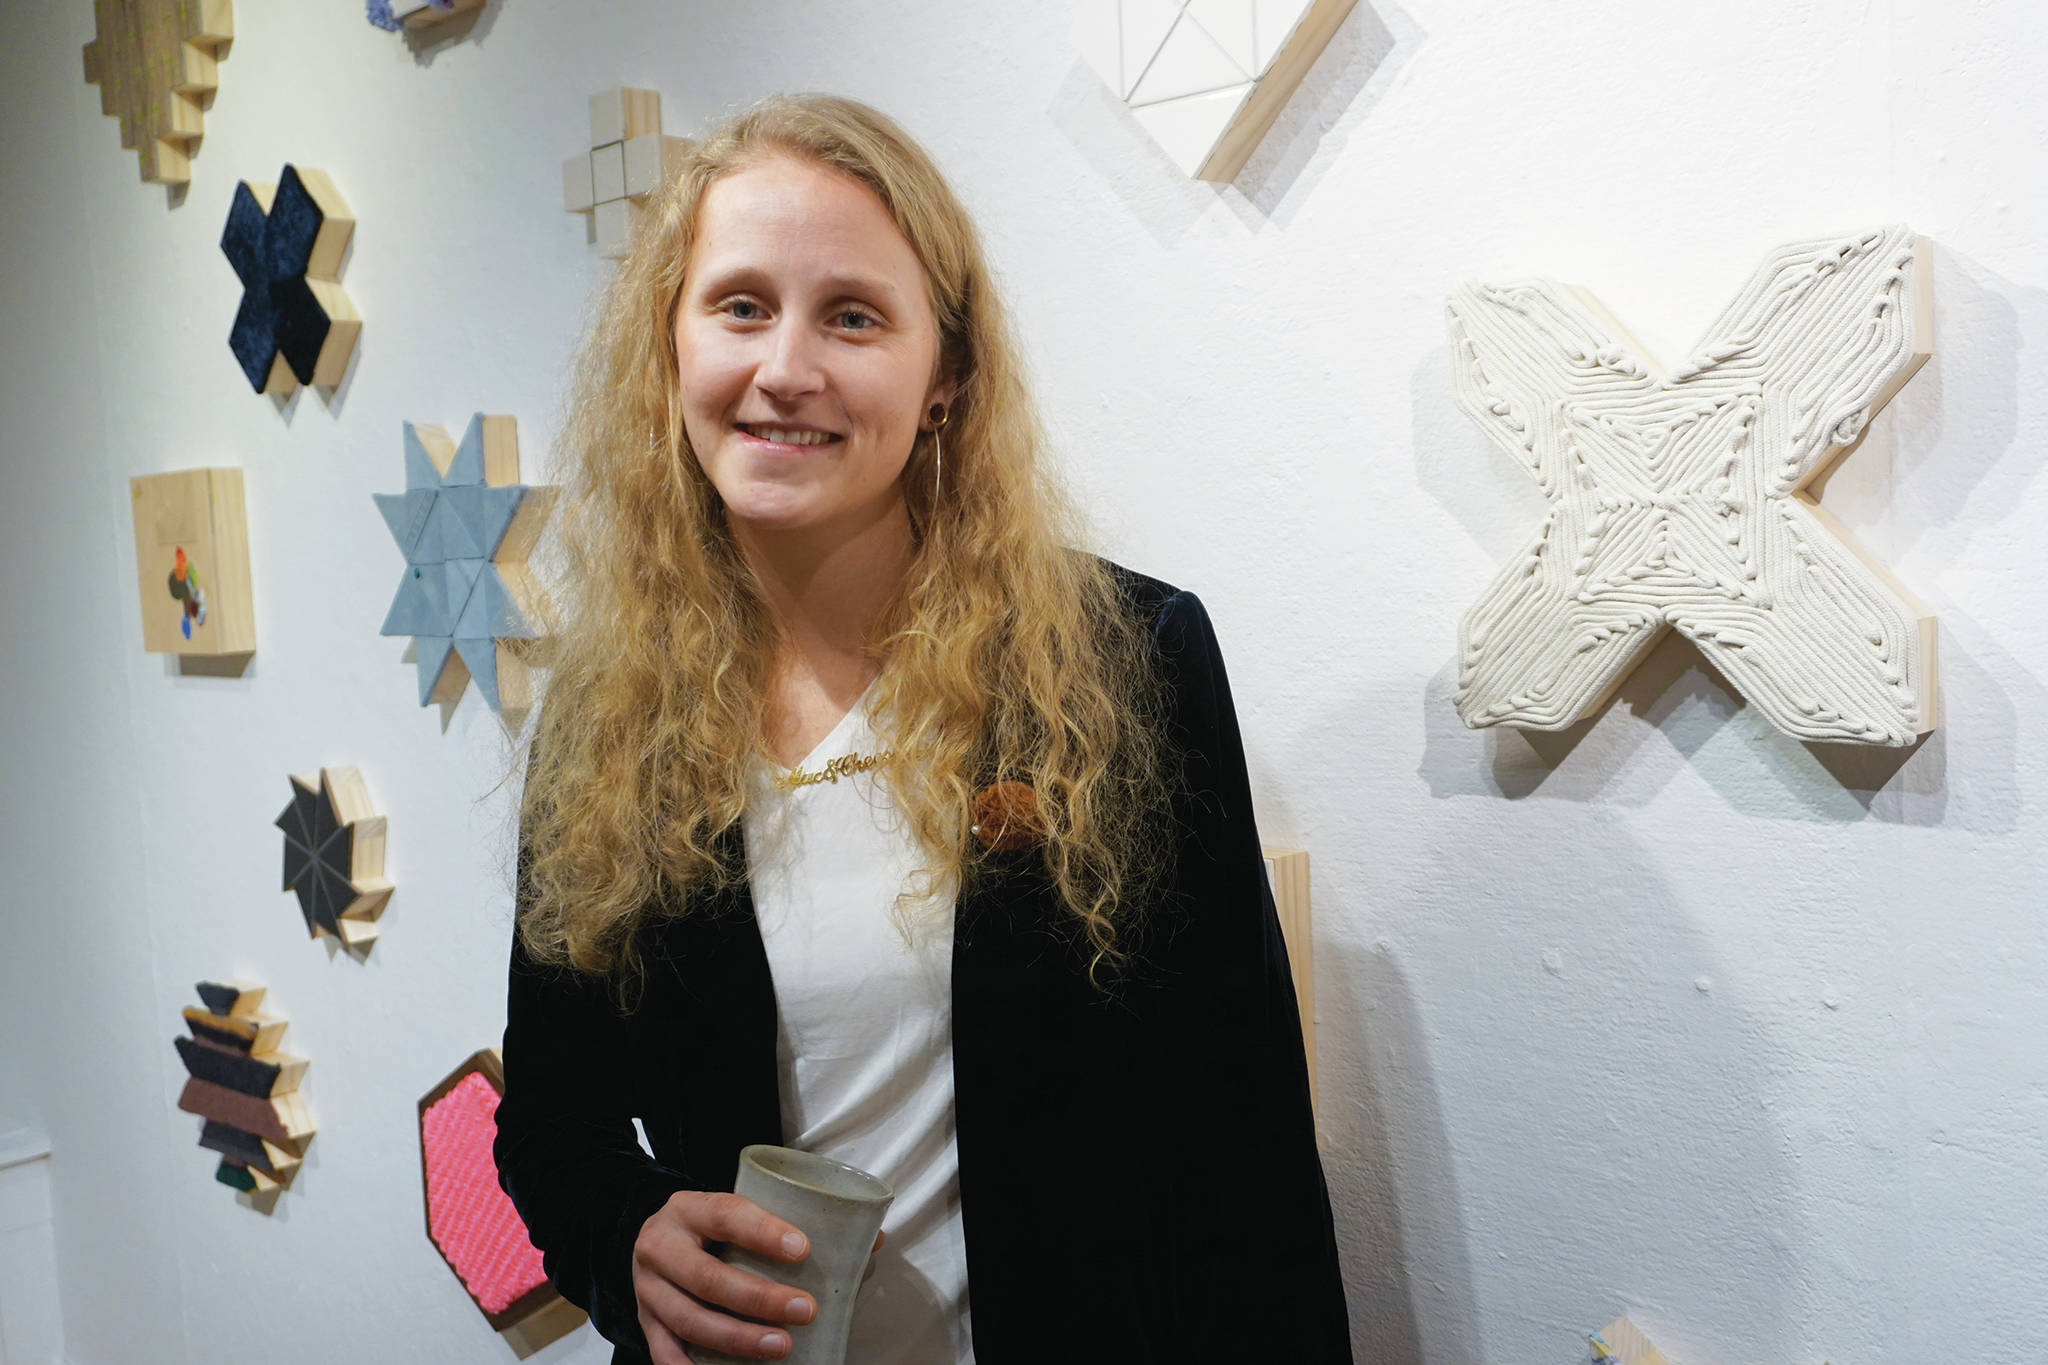 Tamara Wilson poses for a photo at at the First Friday opening on Feb. 15, 2020, of her show, “Macaroni and Cheese,” at Bunnell Street Arts Center in Homer, Alaska. (Photo by Michael Armstrong/Homer News)